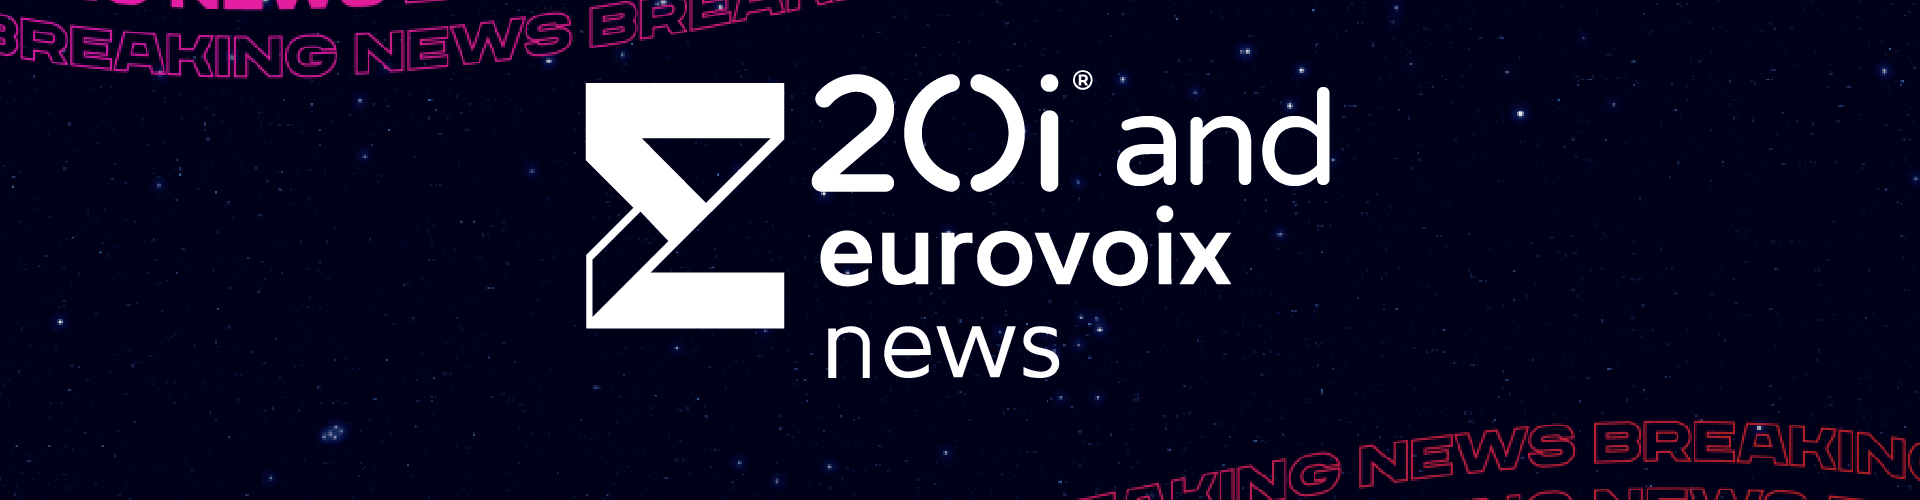 Eurovoix and 20i